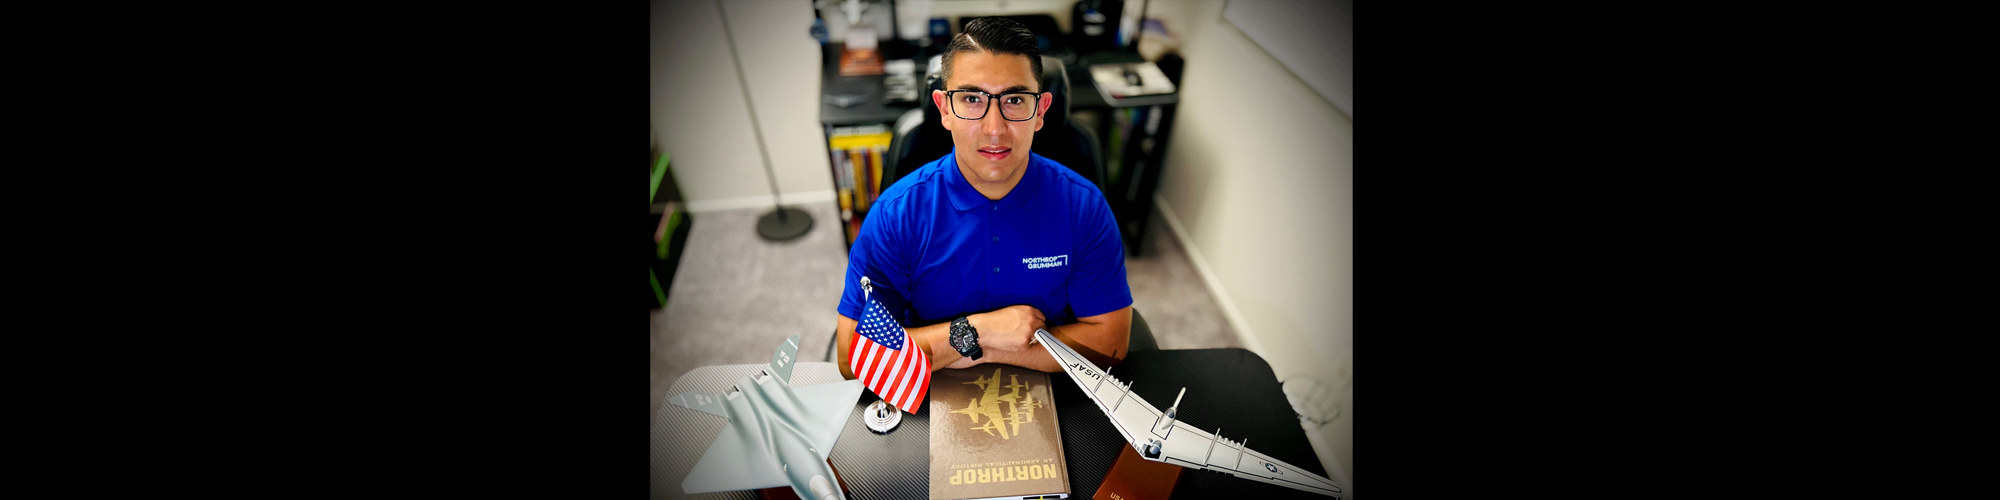 Diego sits at a table with model planes, a Northrop History book and an American flag.